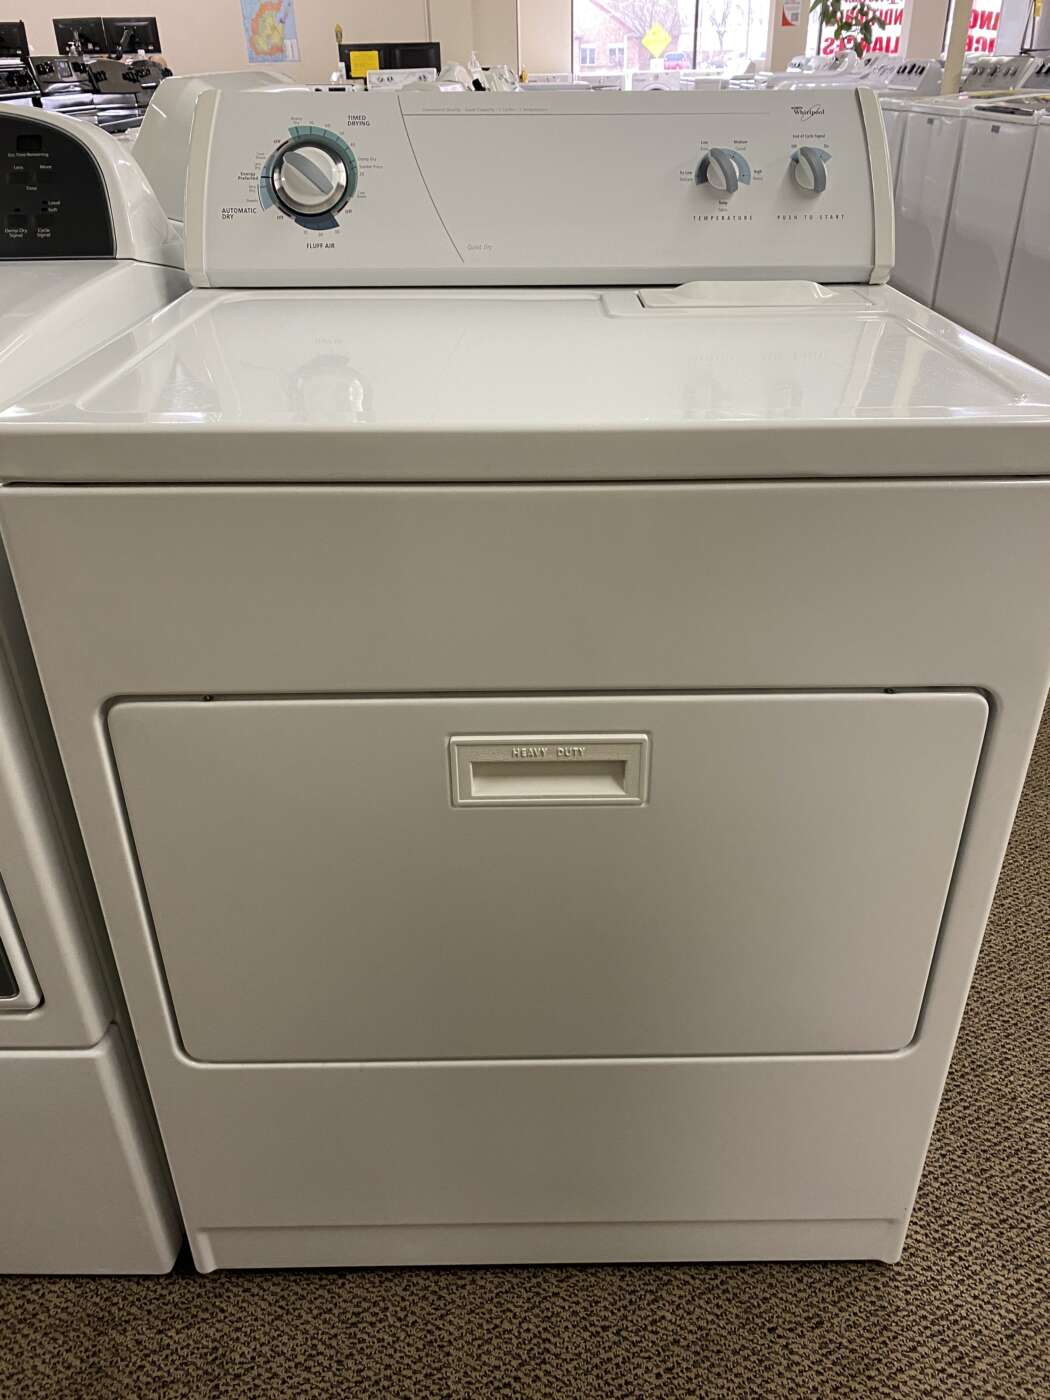 Reconditioned WHIRLPOOL 6.5 Cu. Ft. Electric Dryer – White